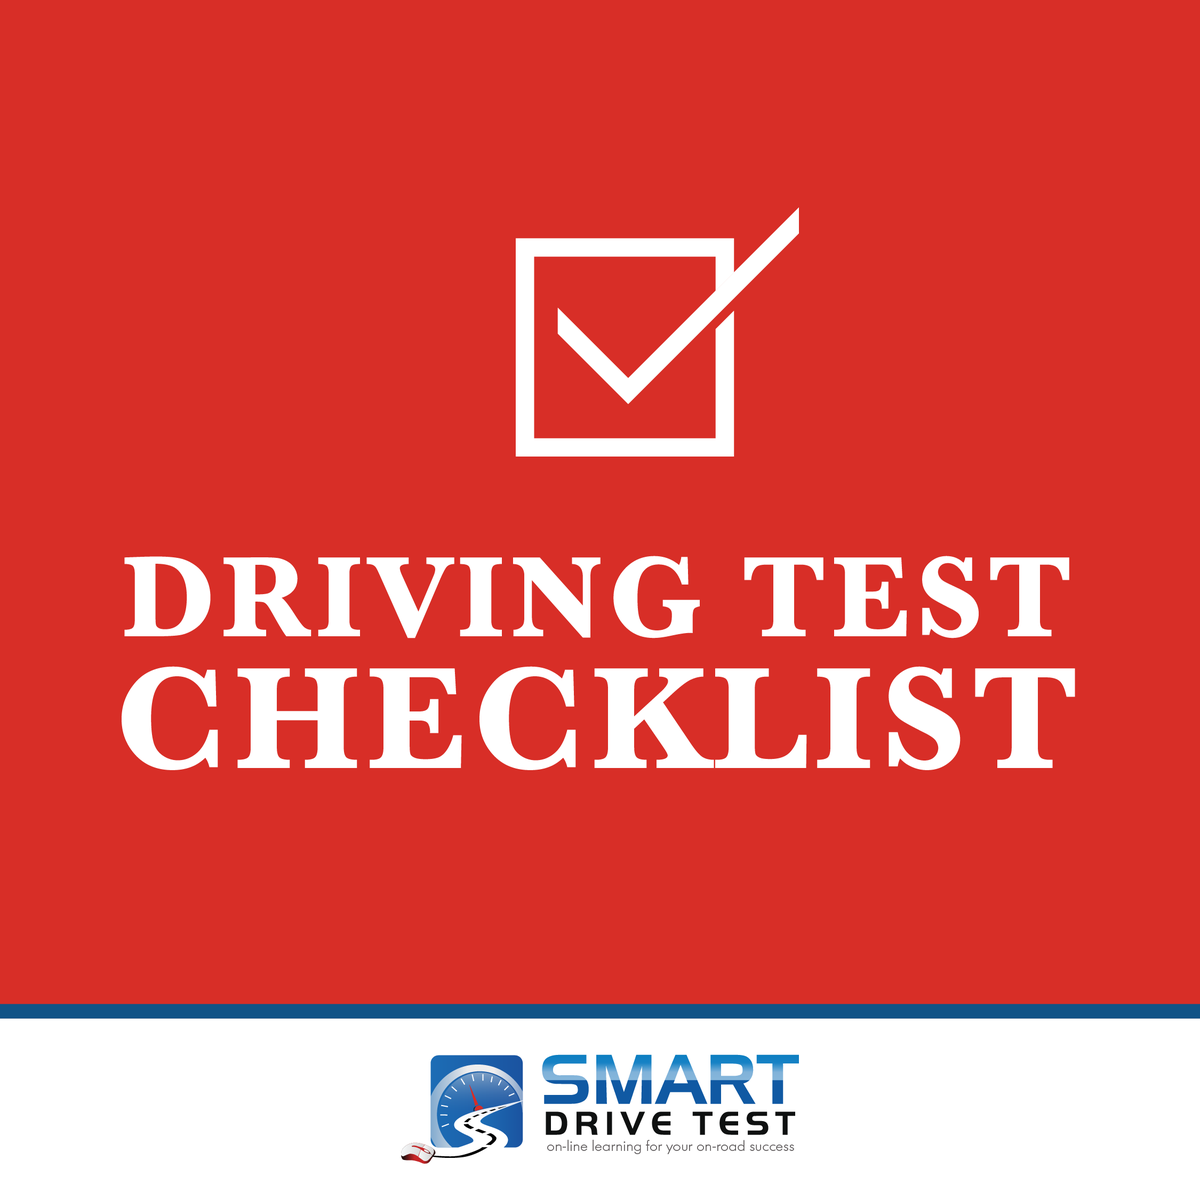 DRIVER'S TEST CHECKLIST

CLICK to get all the information you need to pass your driver's test the first time!

Get your DON'T FAIL Your Driver's Test checklist here: smartdrivetest.com/pass-drivers-t…

#drivingtestpassed #drivingtest #drivingtestsuccess #drivingschool